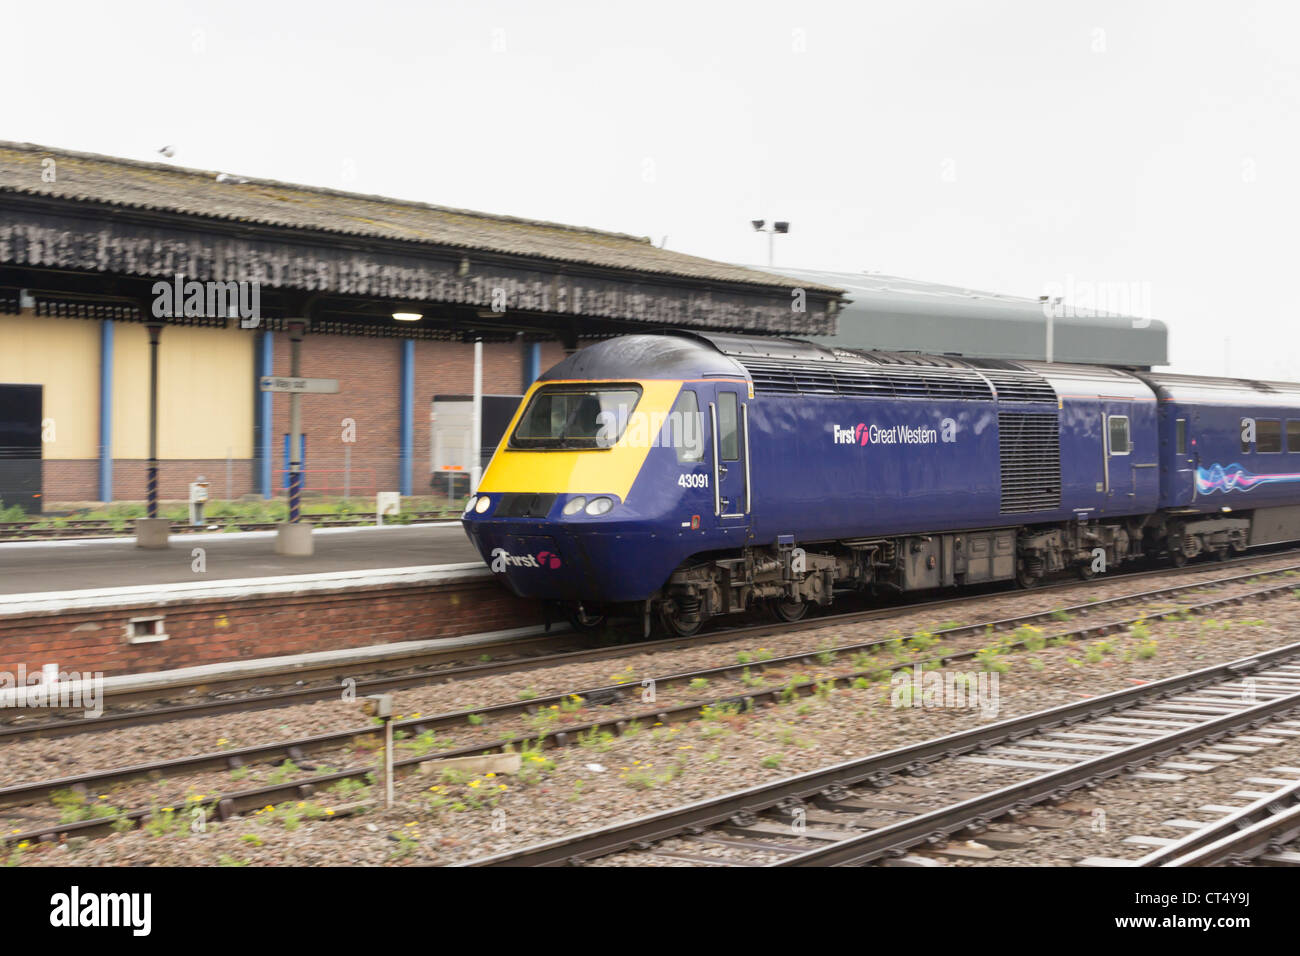 First Great Western Class 43 High Speed Train (HST) set entering Swindon railway station en-route to London. Stock Photo